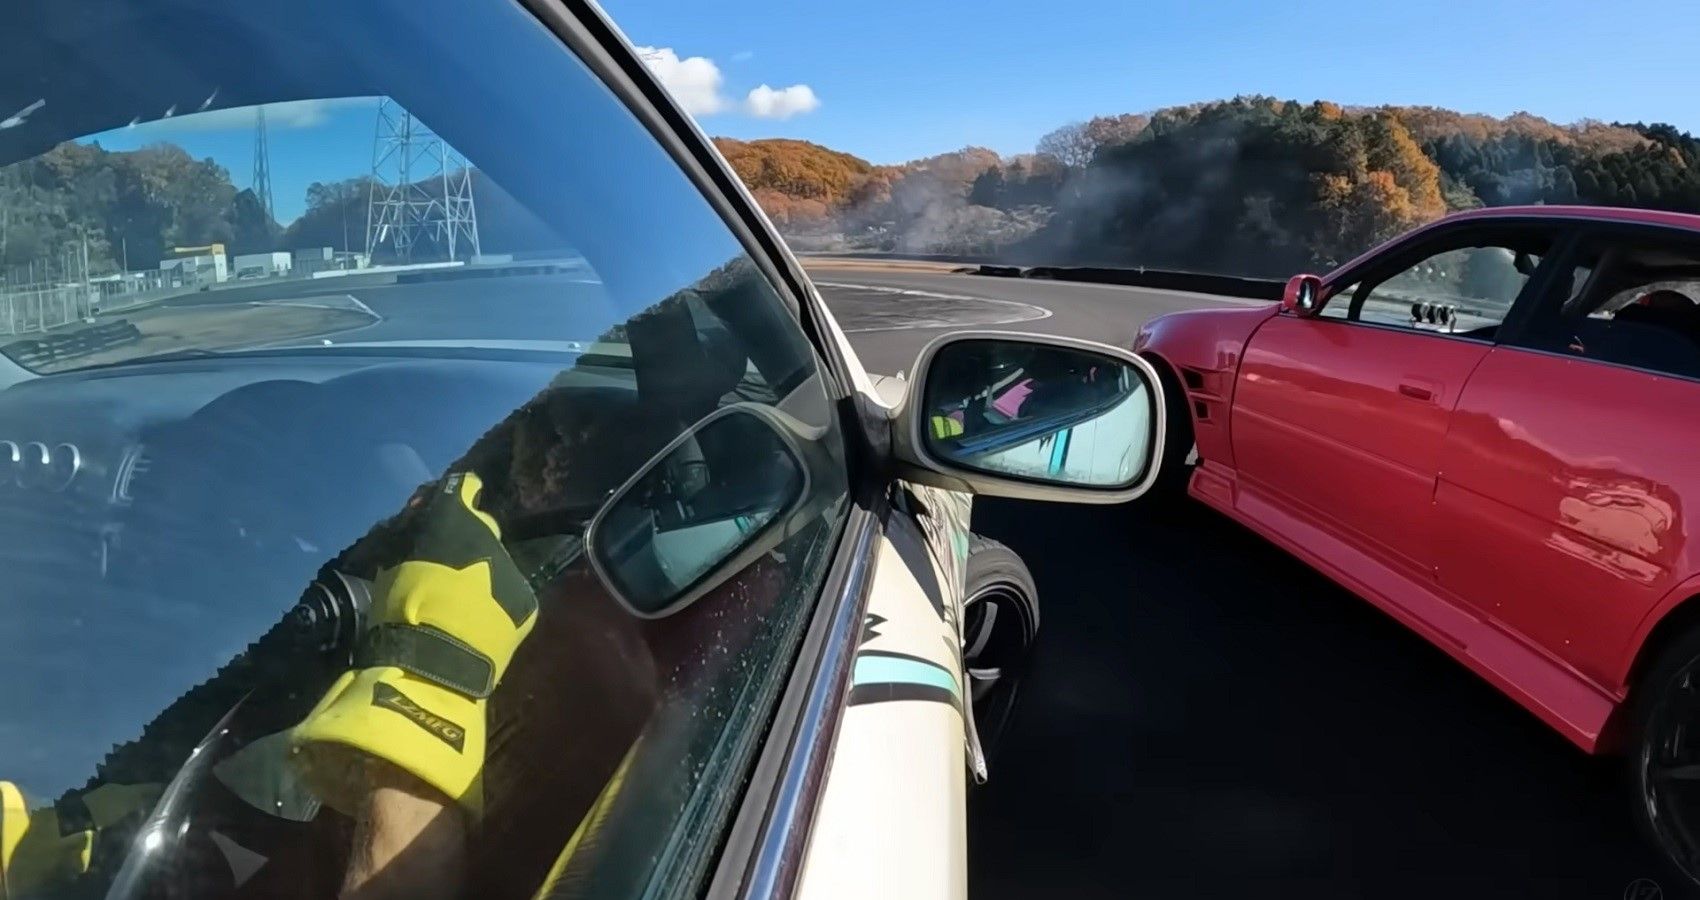 This Is How Adam LZ Has A Good Time While Drifting With These Awesome Cars